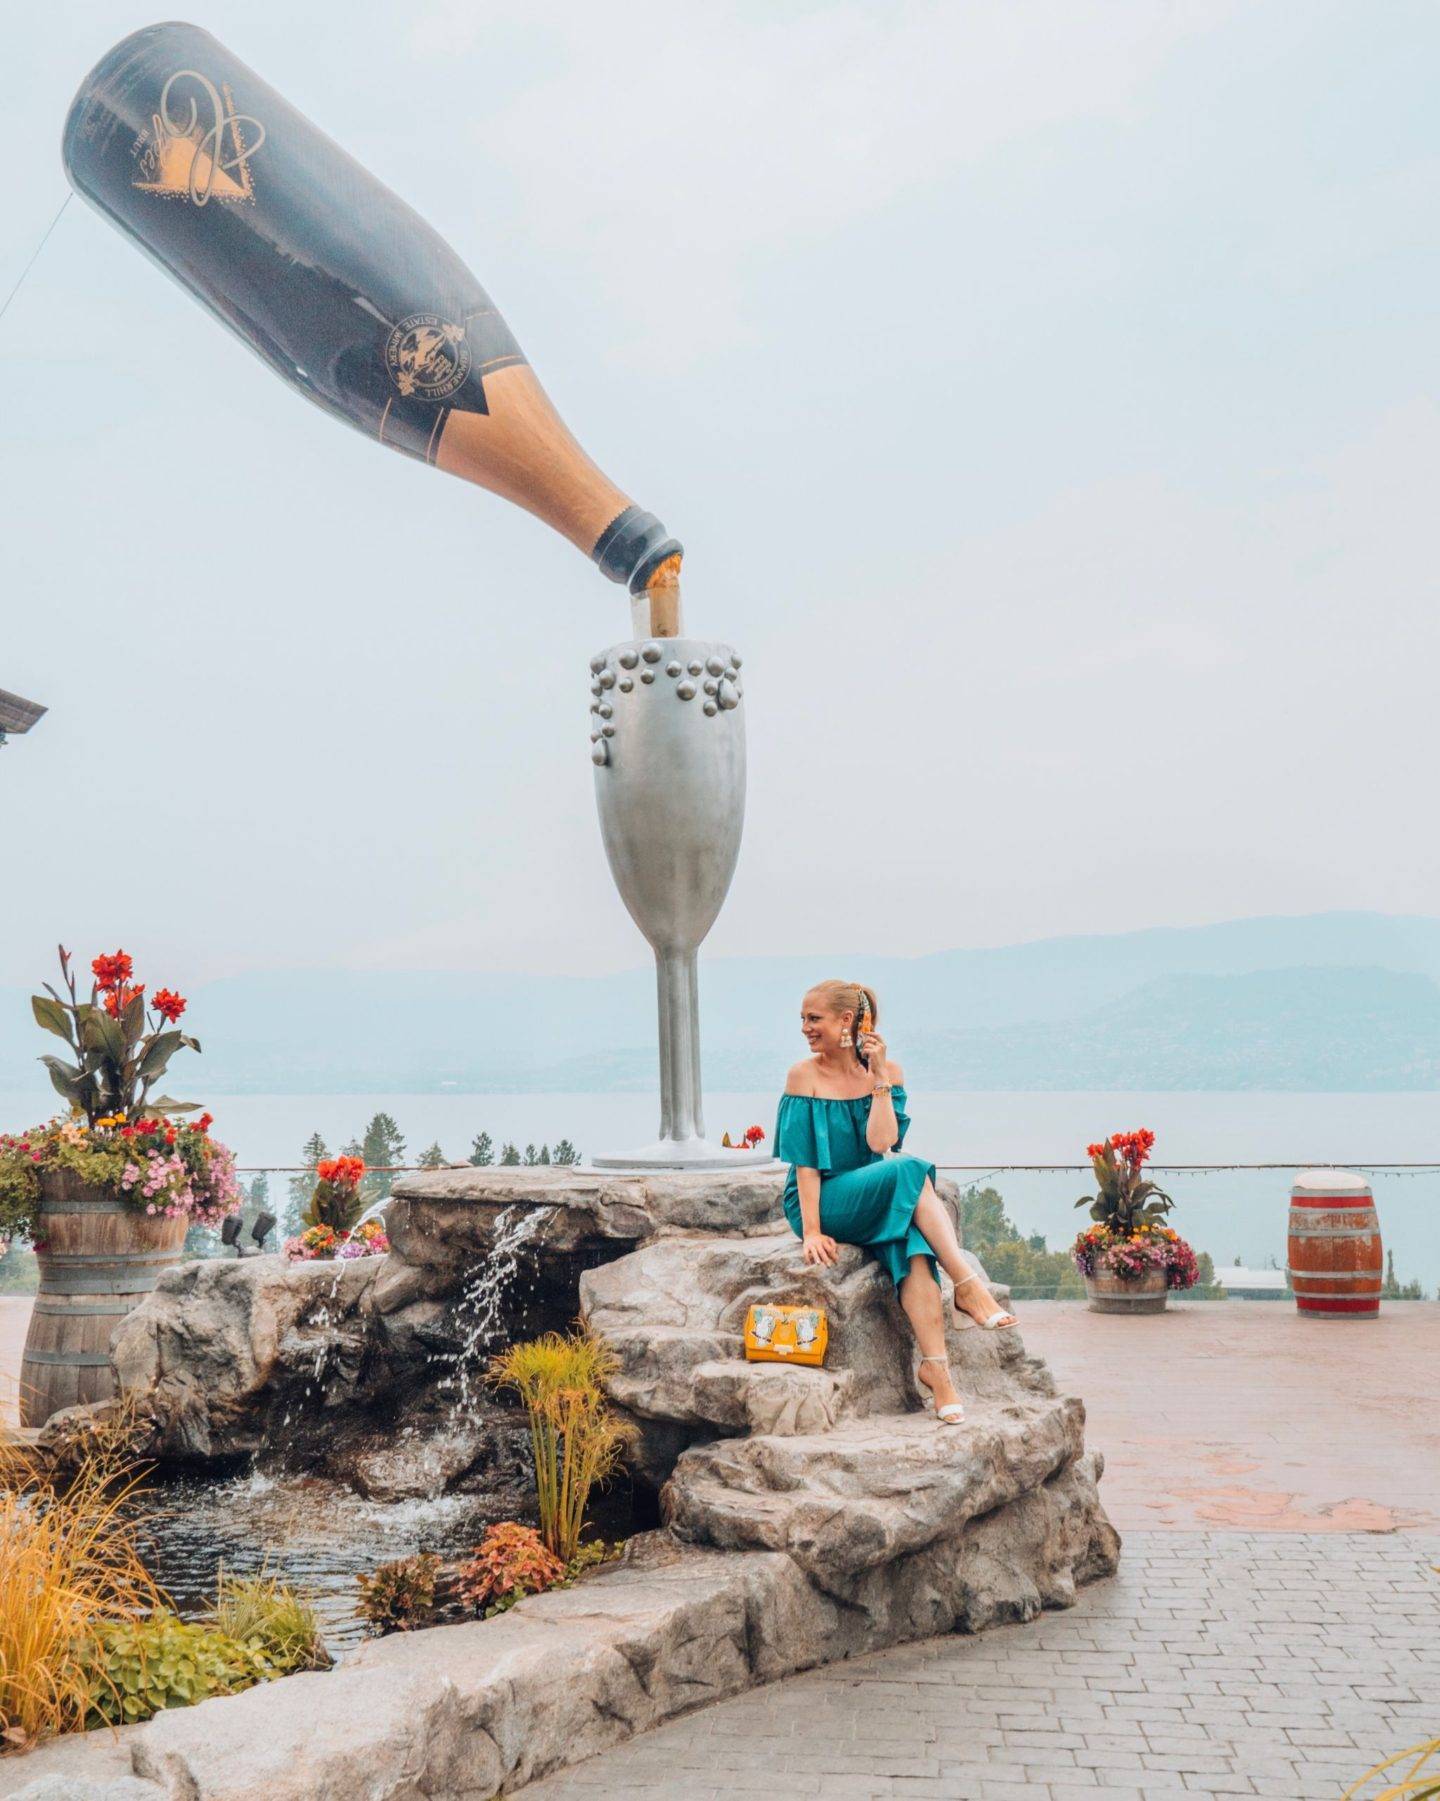 Looking for the most beautiful Instagrammable places in Kelowna? Check out this guide to find the best photography spots in Kelowna! 

Pictured here: Summerhill Pyramid Winery